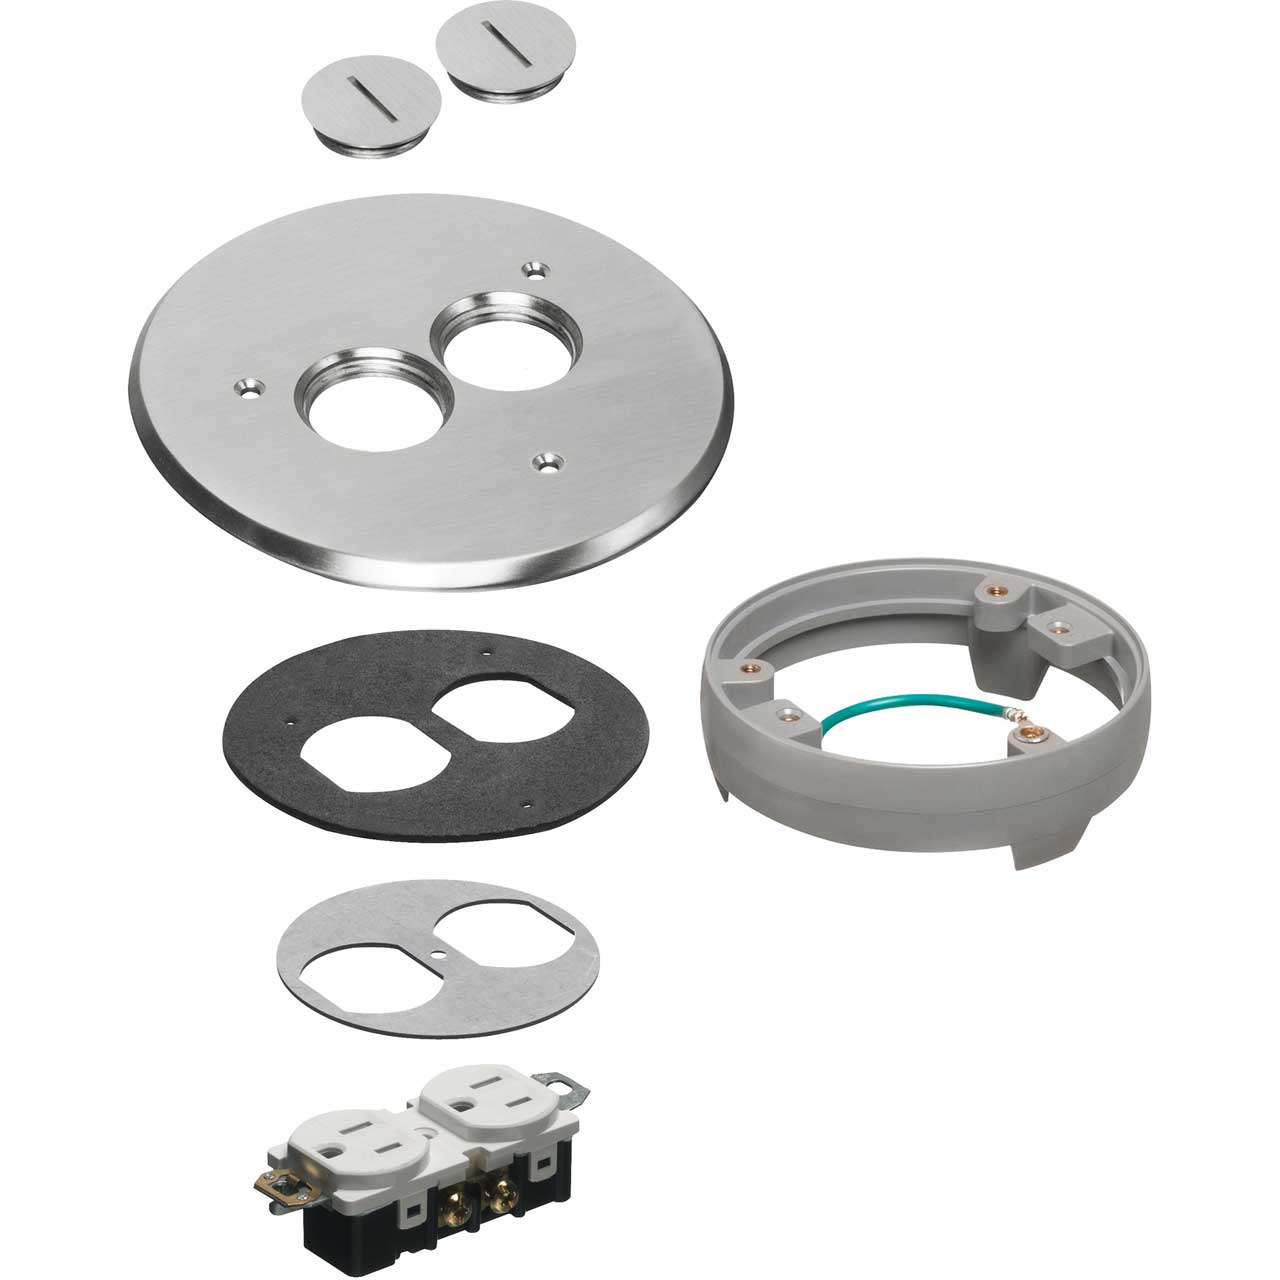 Arlington FLB6220NLLR Flip Lid Style Metal Cover Kit with Leveling Ring & 2 Threaded Plugs - Nickel